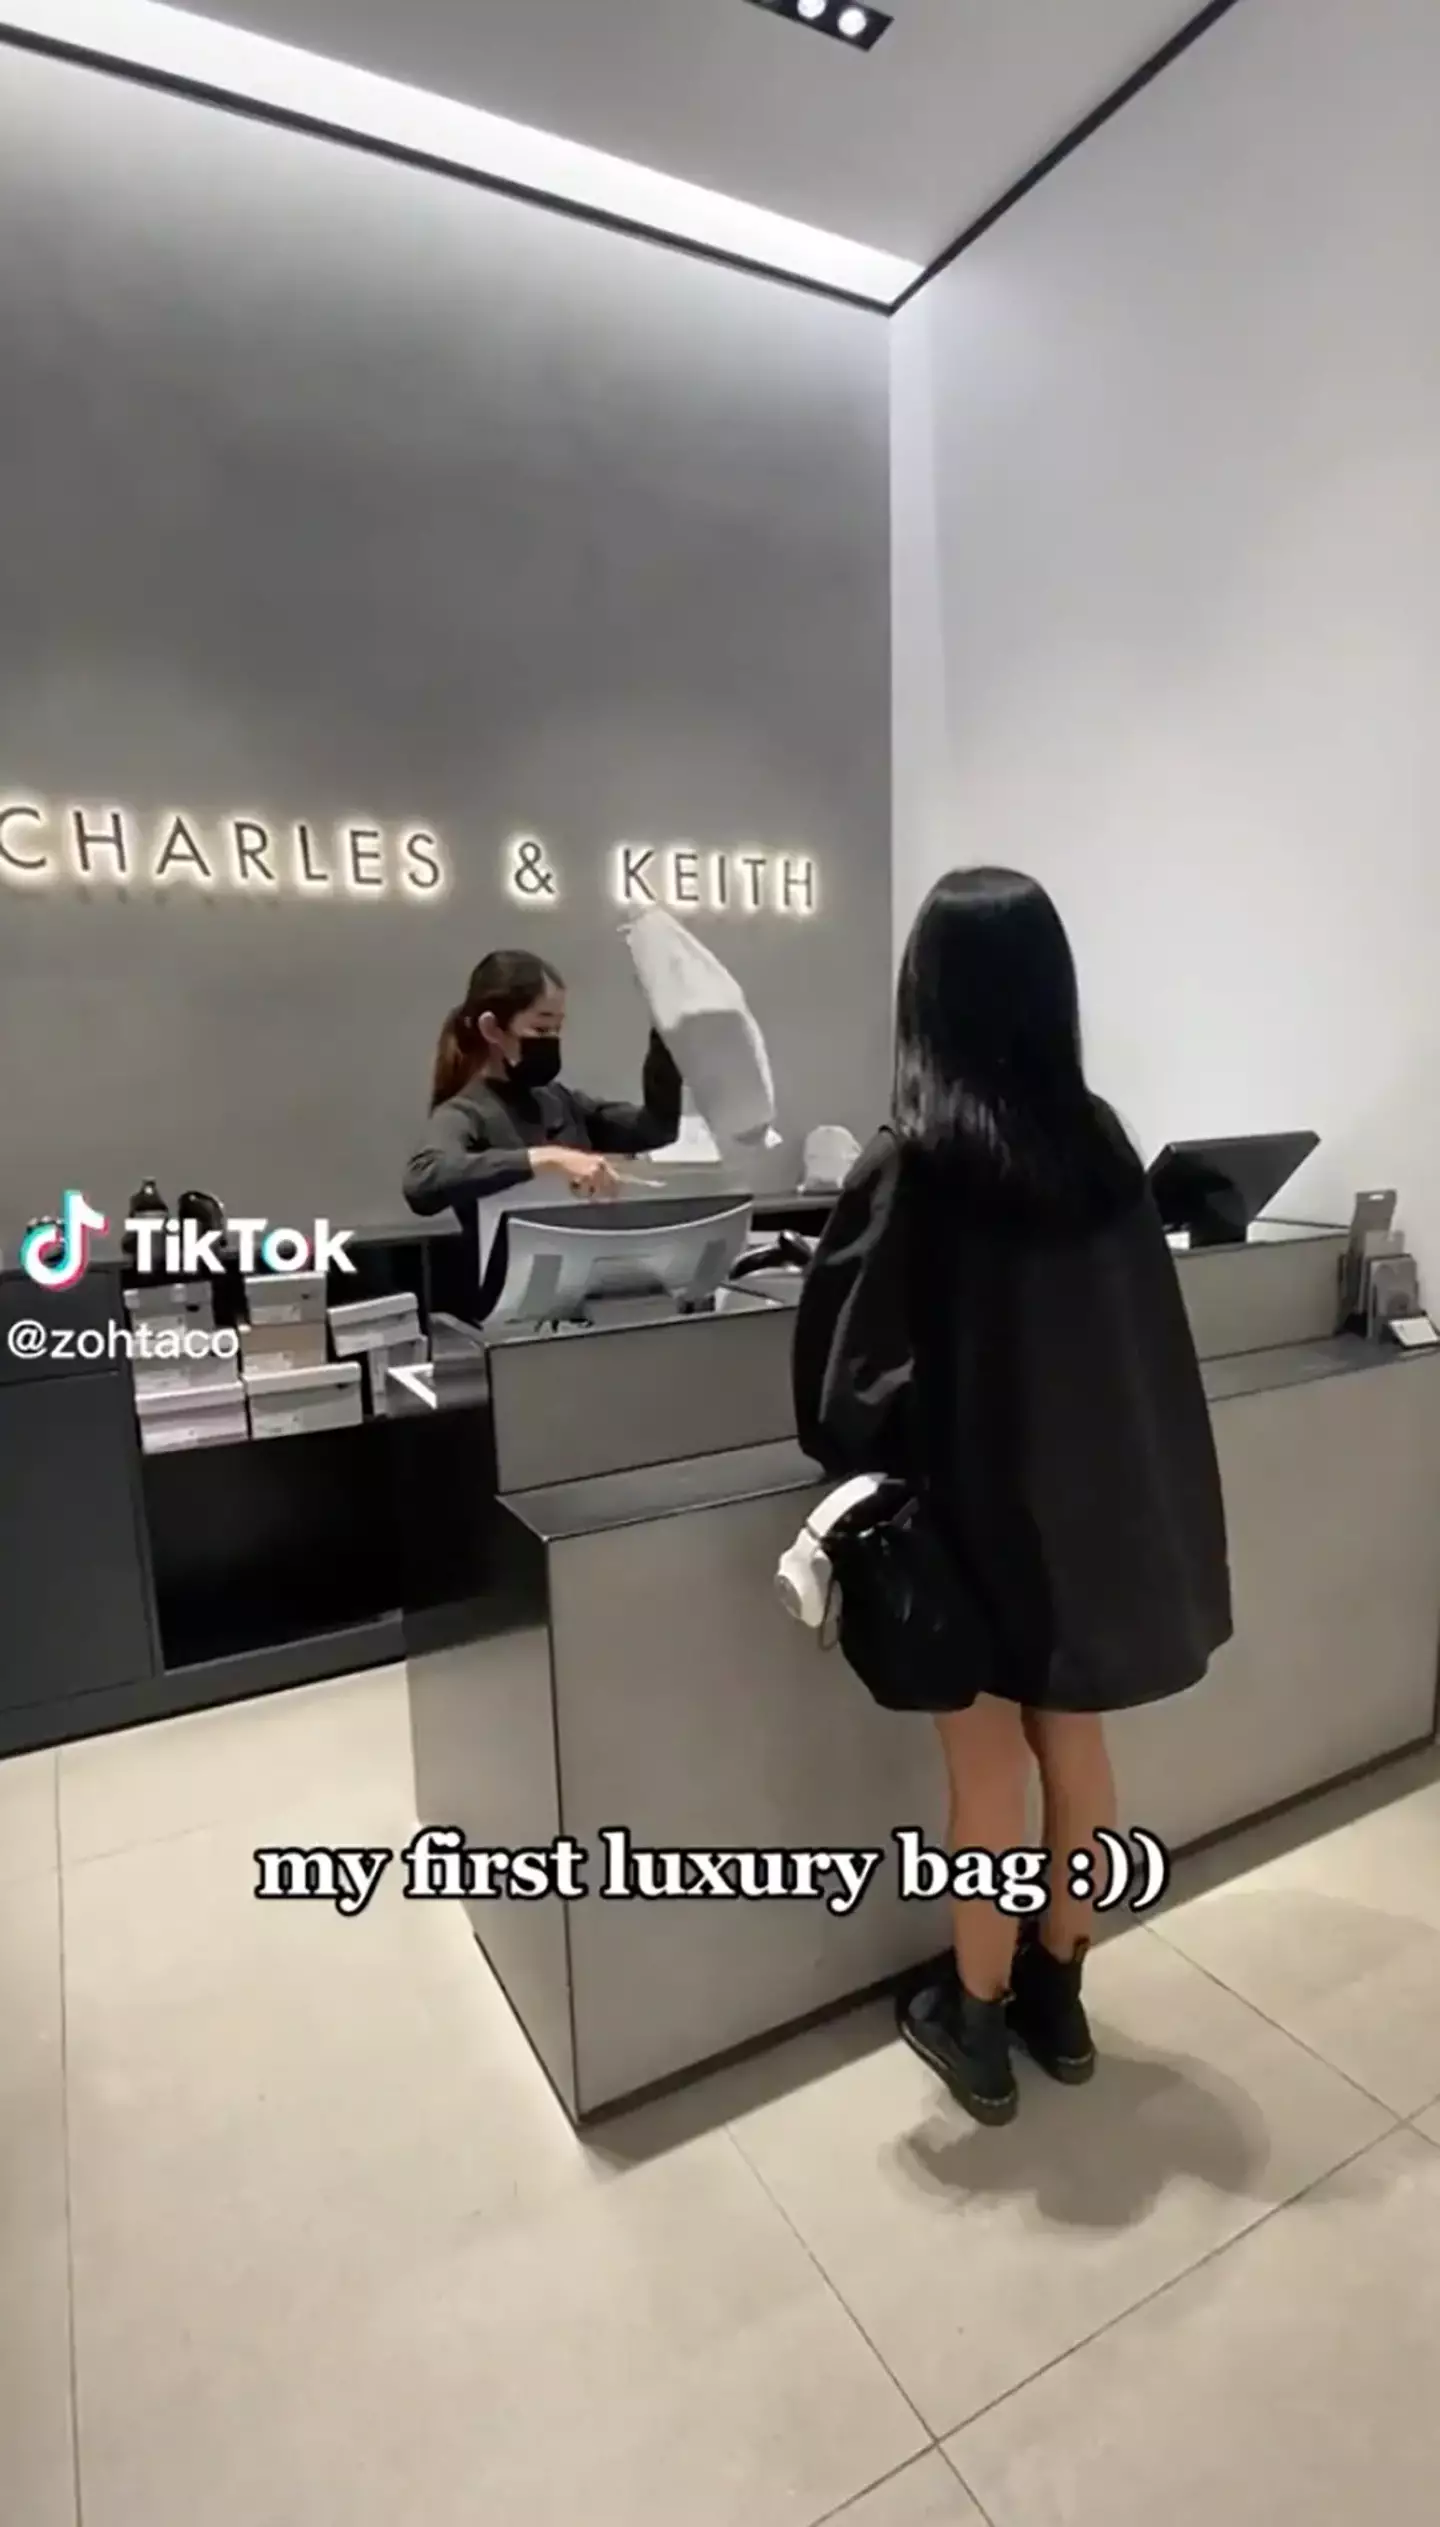 Zoe picking up her new handbag from the Charles & Keith counter.